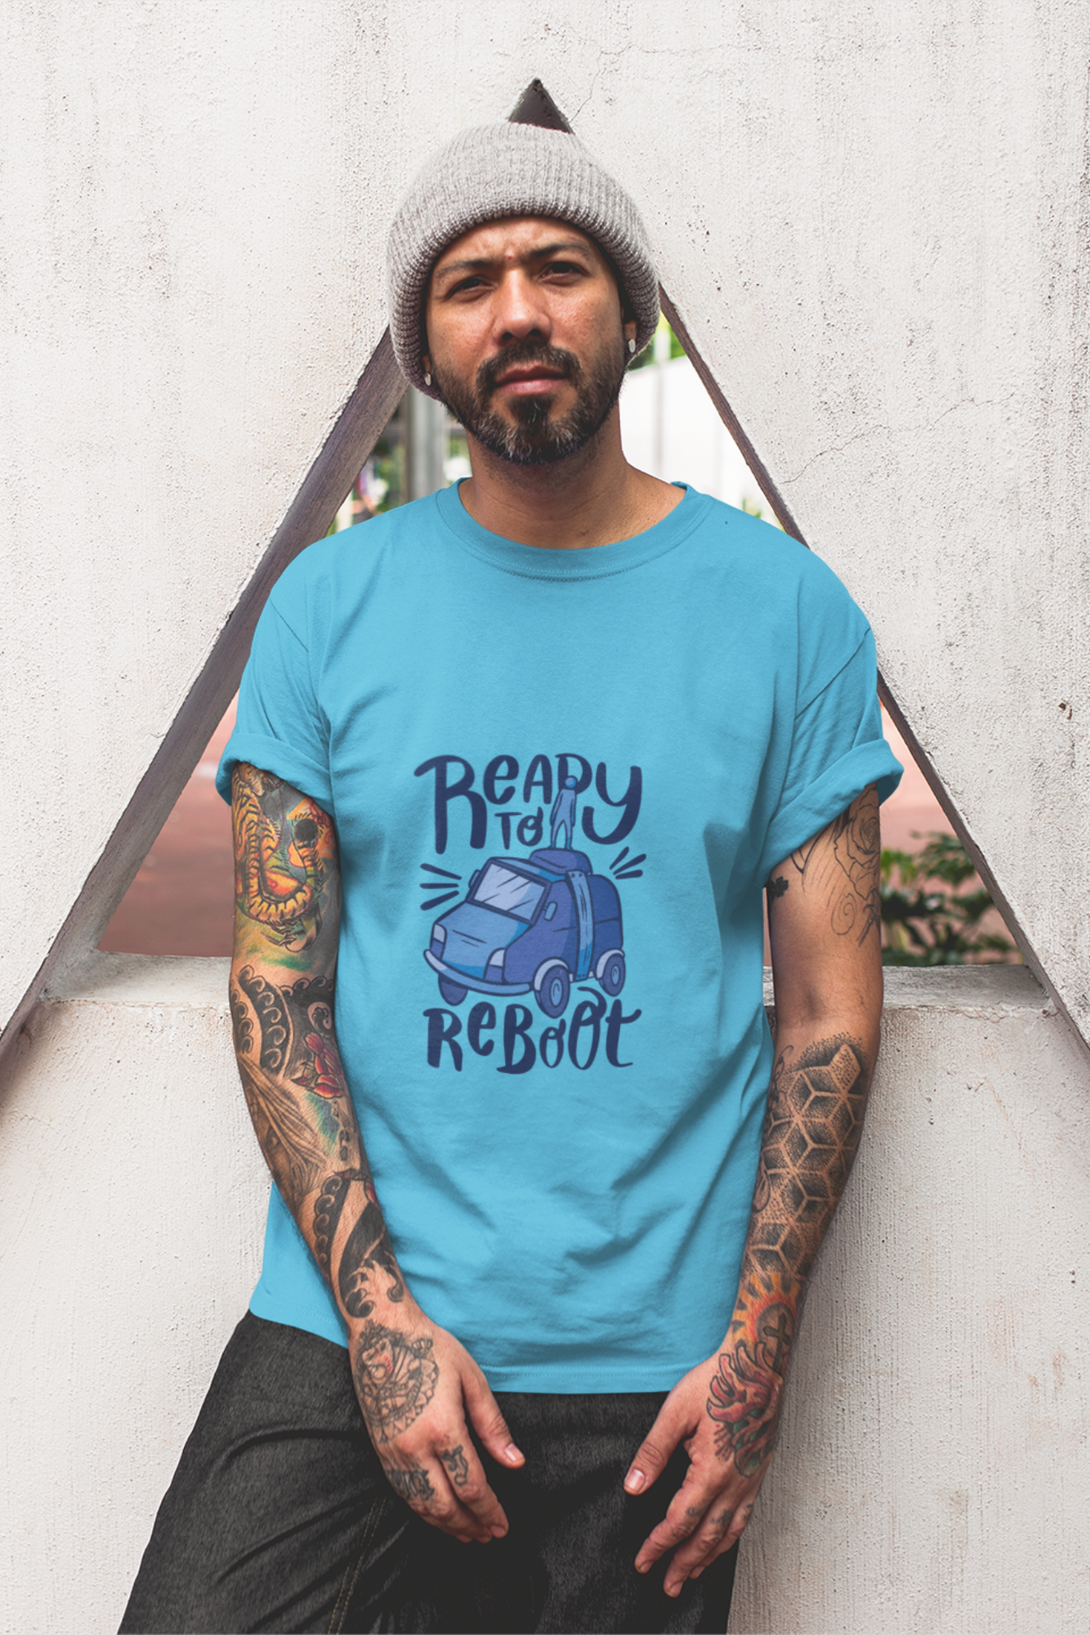 Ready To Reboot Printed T-Shirt For Men - WowWaves - 2